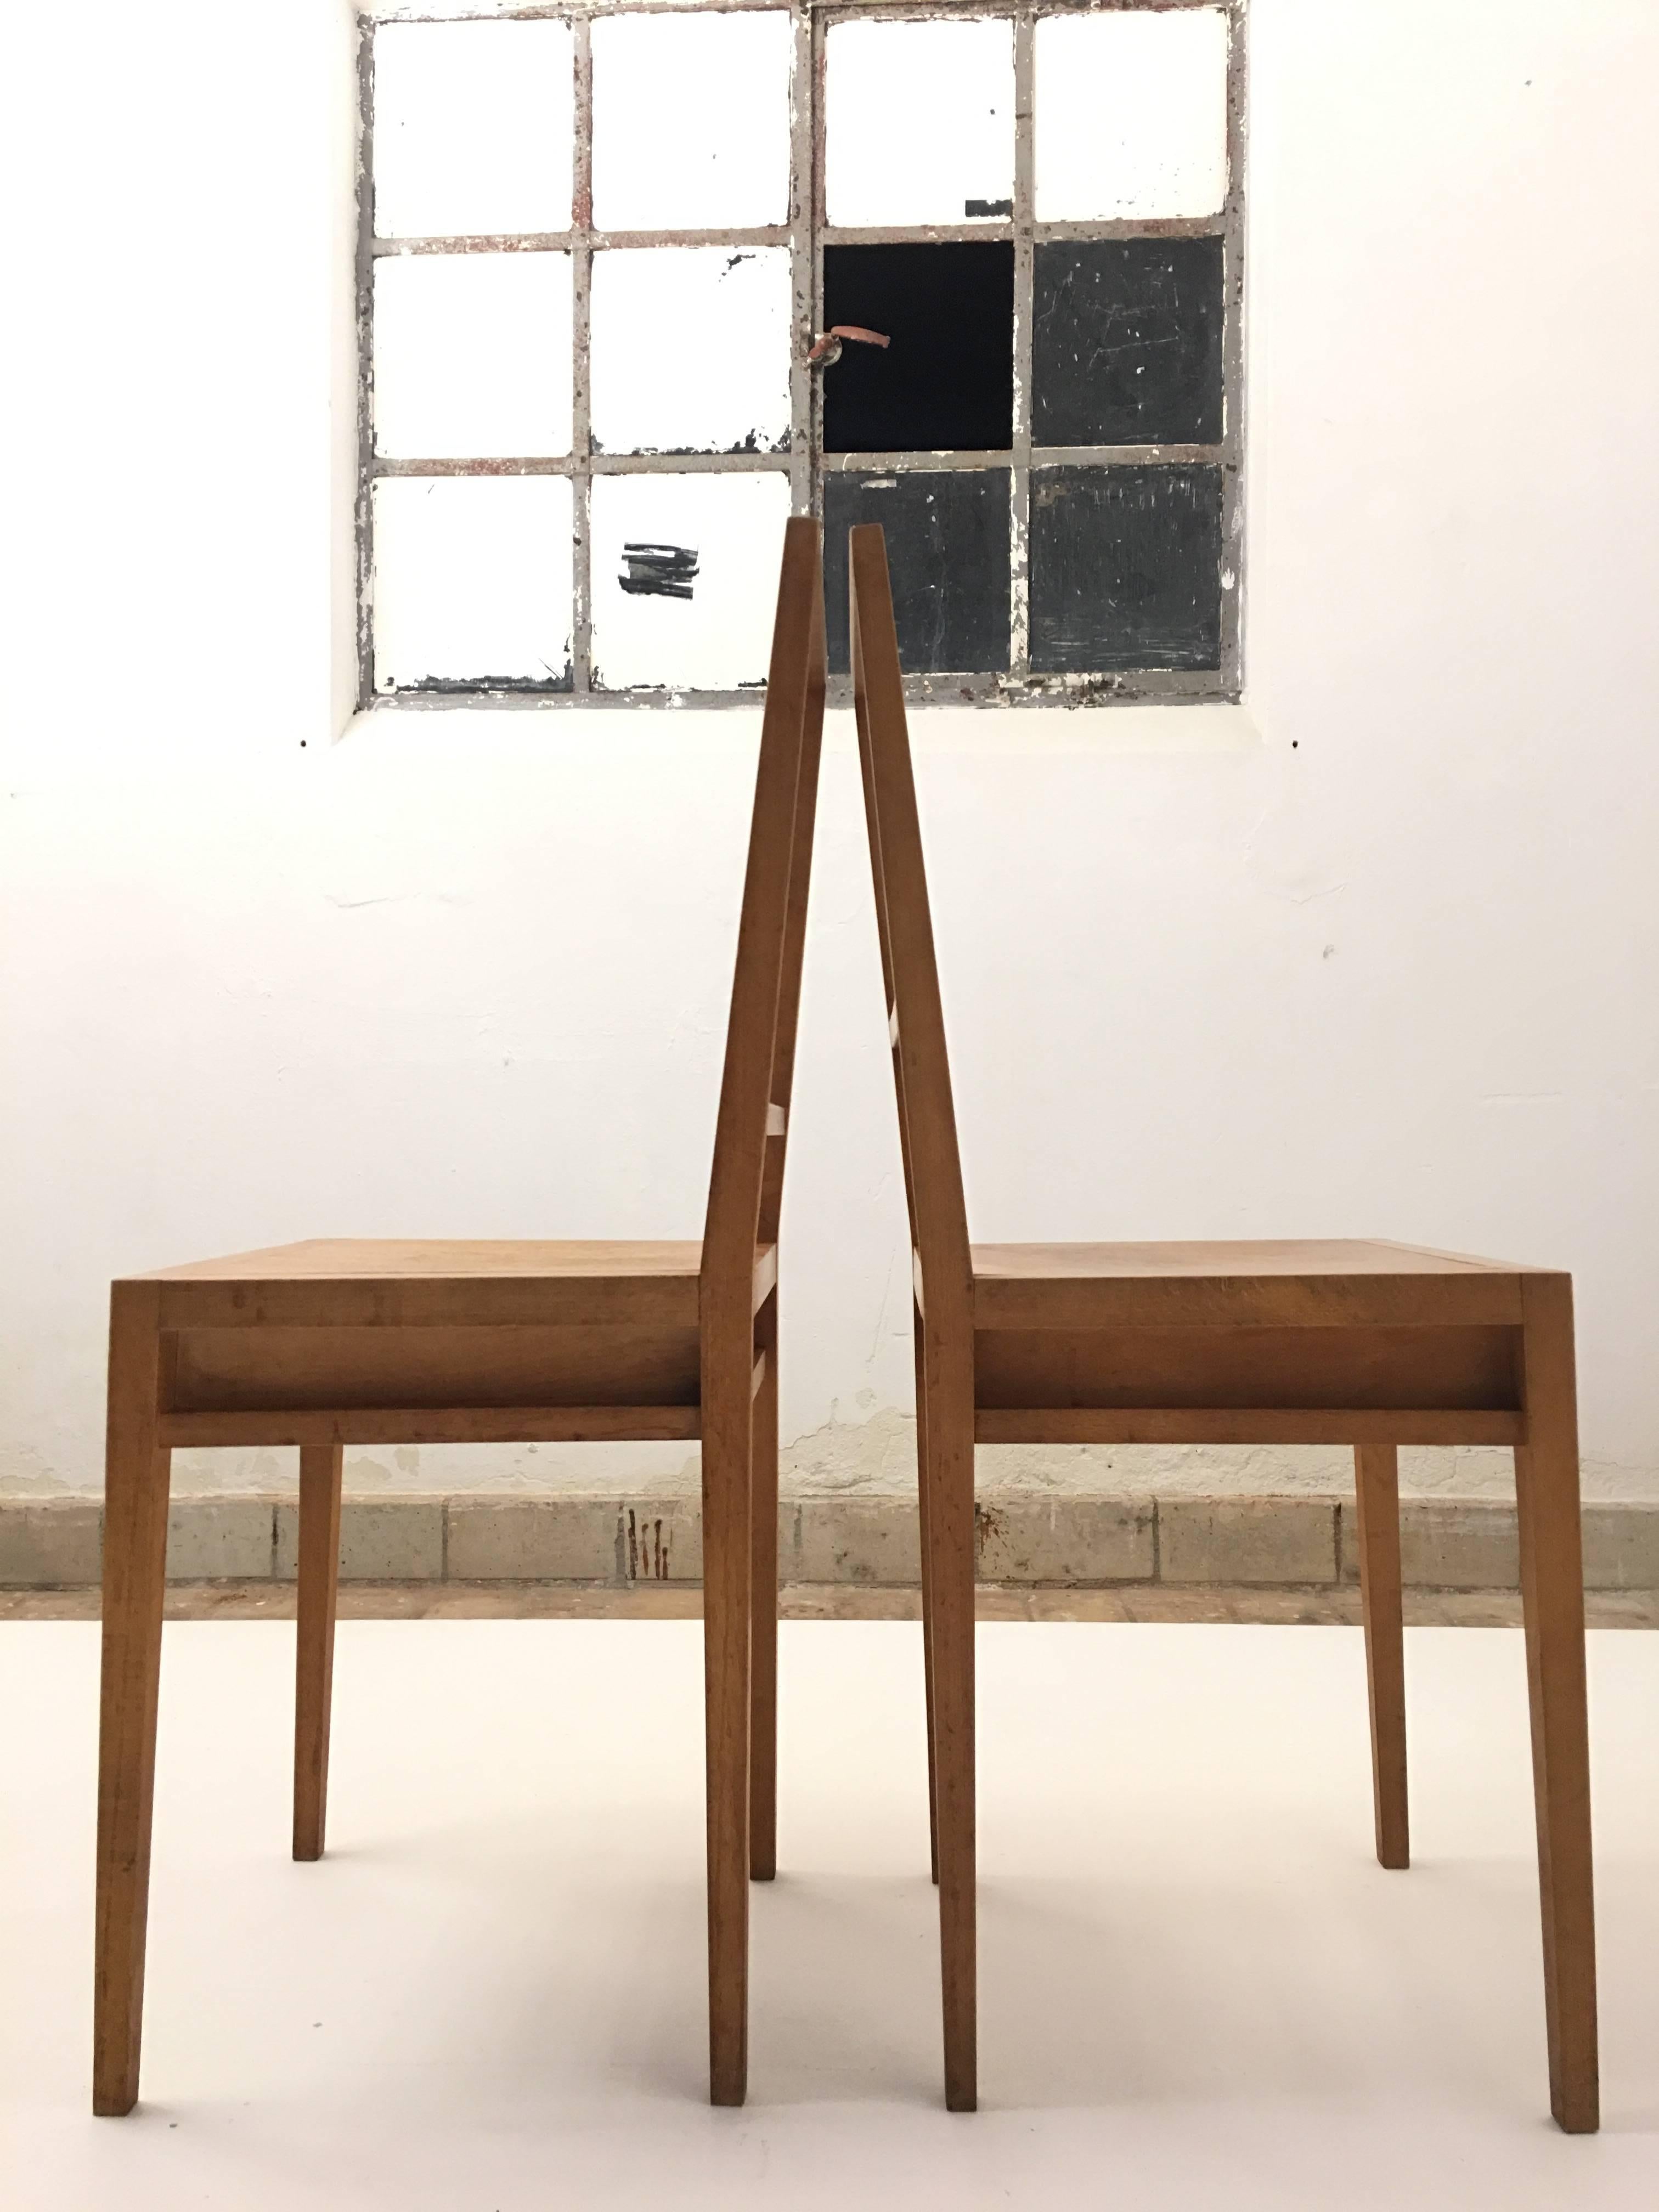 This unique pair of 'one nightstand' chairs comes from a private collection and only three were ever produced

It was commissioned by the Aids Foundation in 1995 

Henk Stallinga was one of the young designers that was adopted by Droog Design in